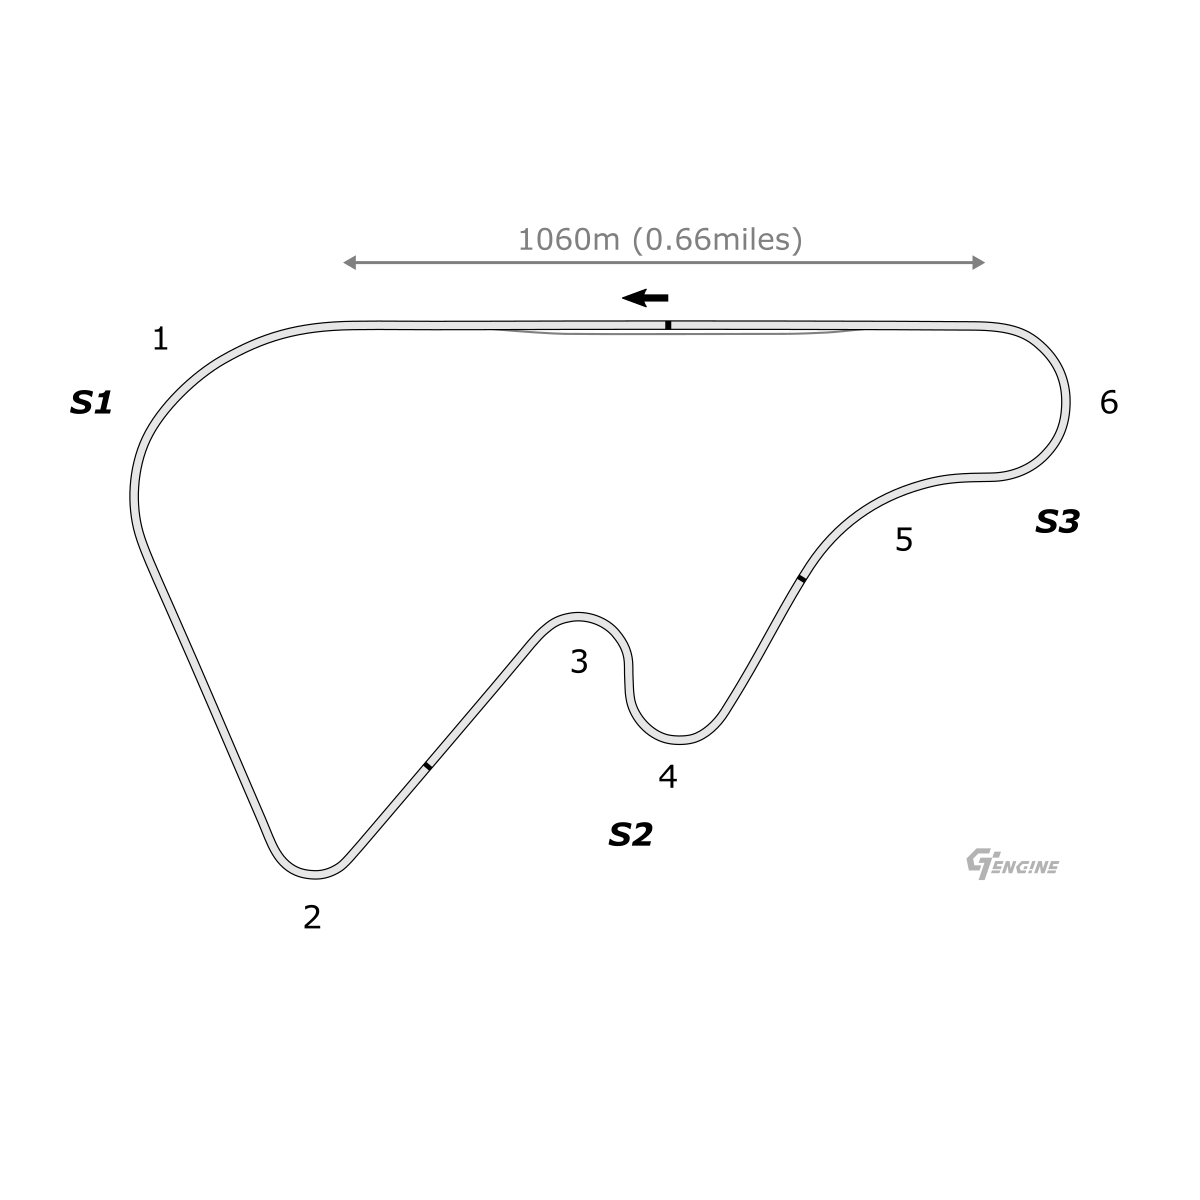 High Speed Ring track map